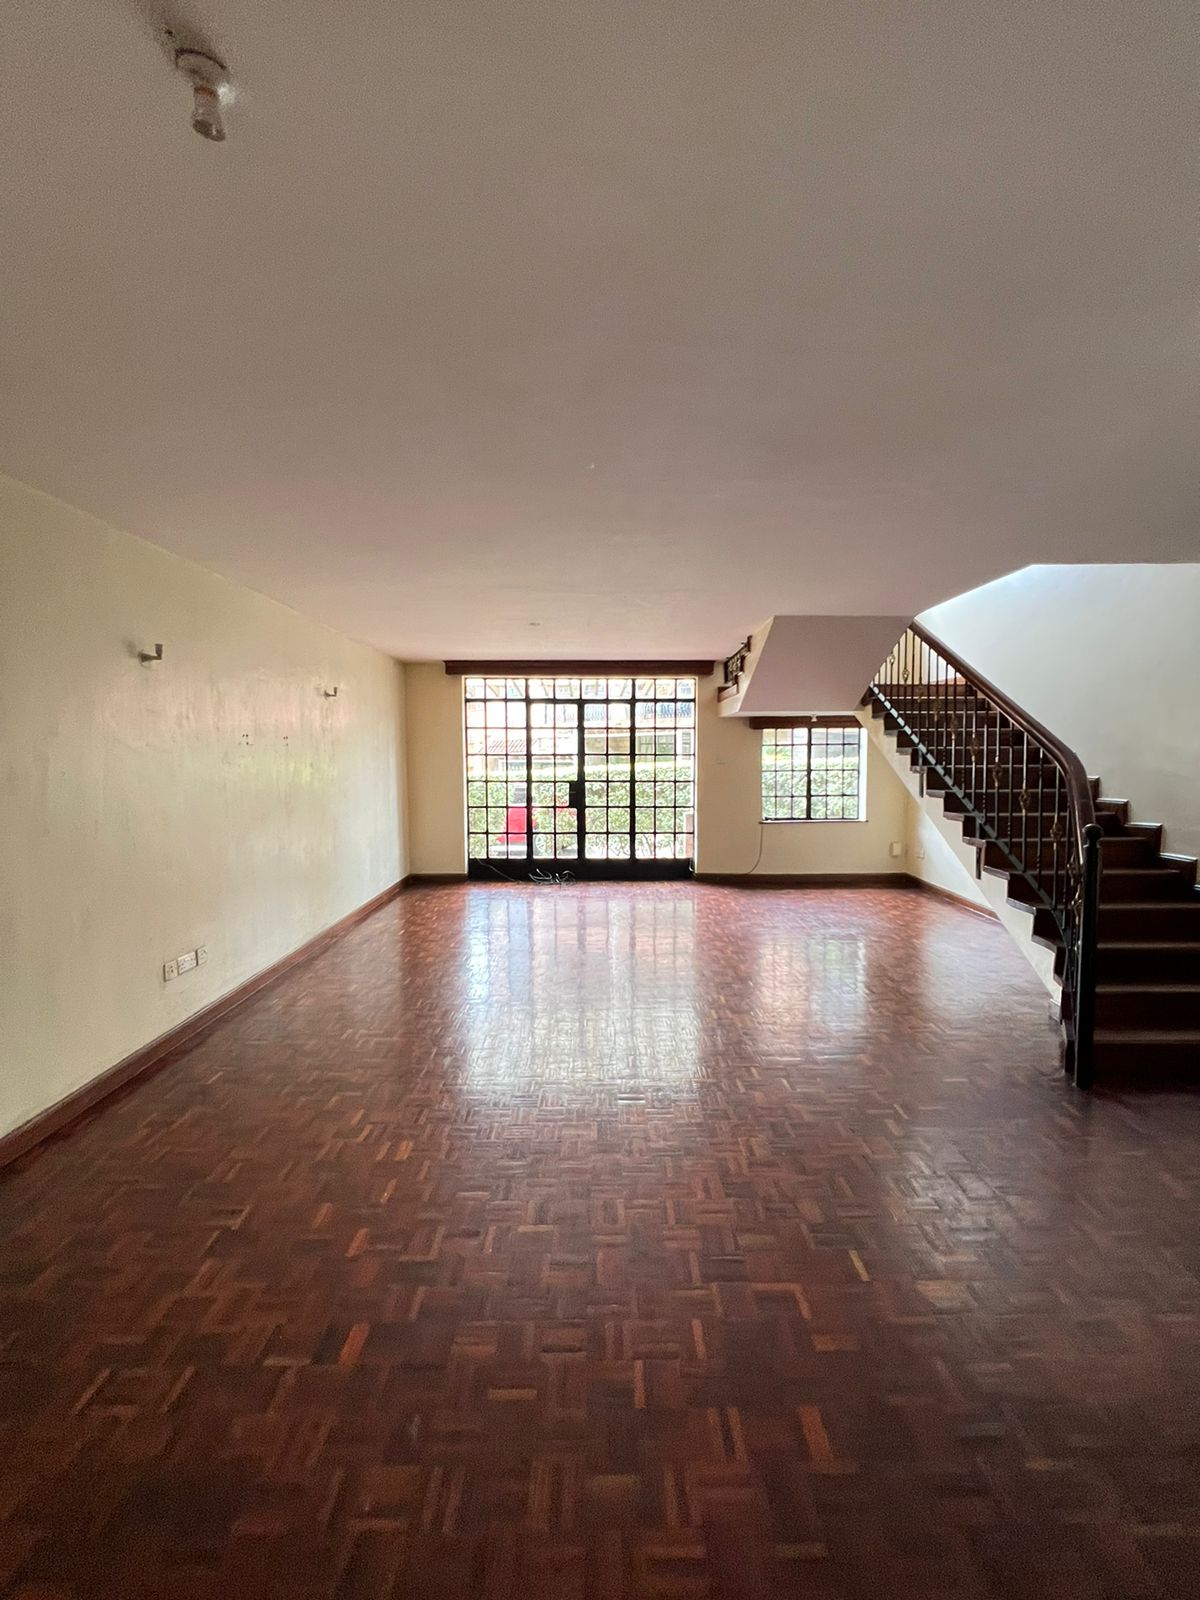 Spacious modern 5 bedroom plus dsq townhouse to let in Kileleshwa. Swimming pool. Few units in the compound. Rent per month 160K Musilli Homes